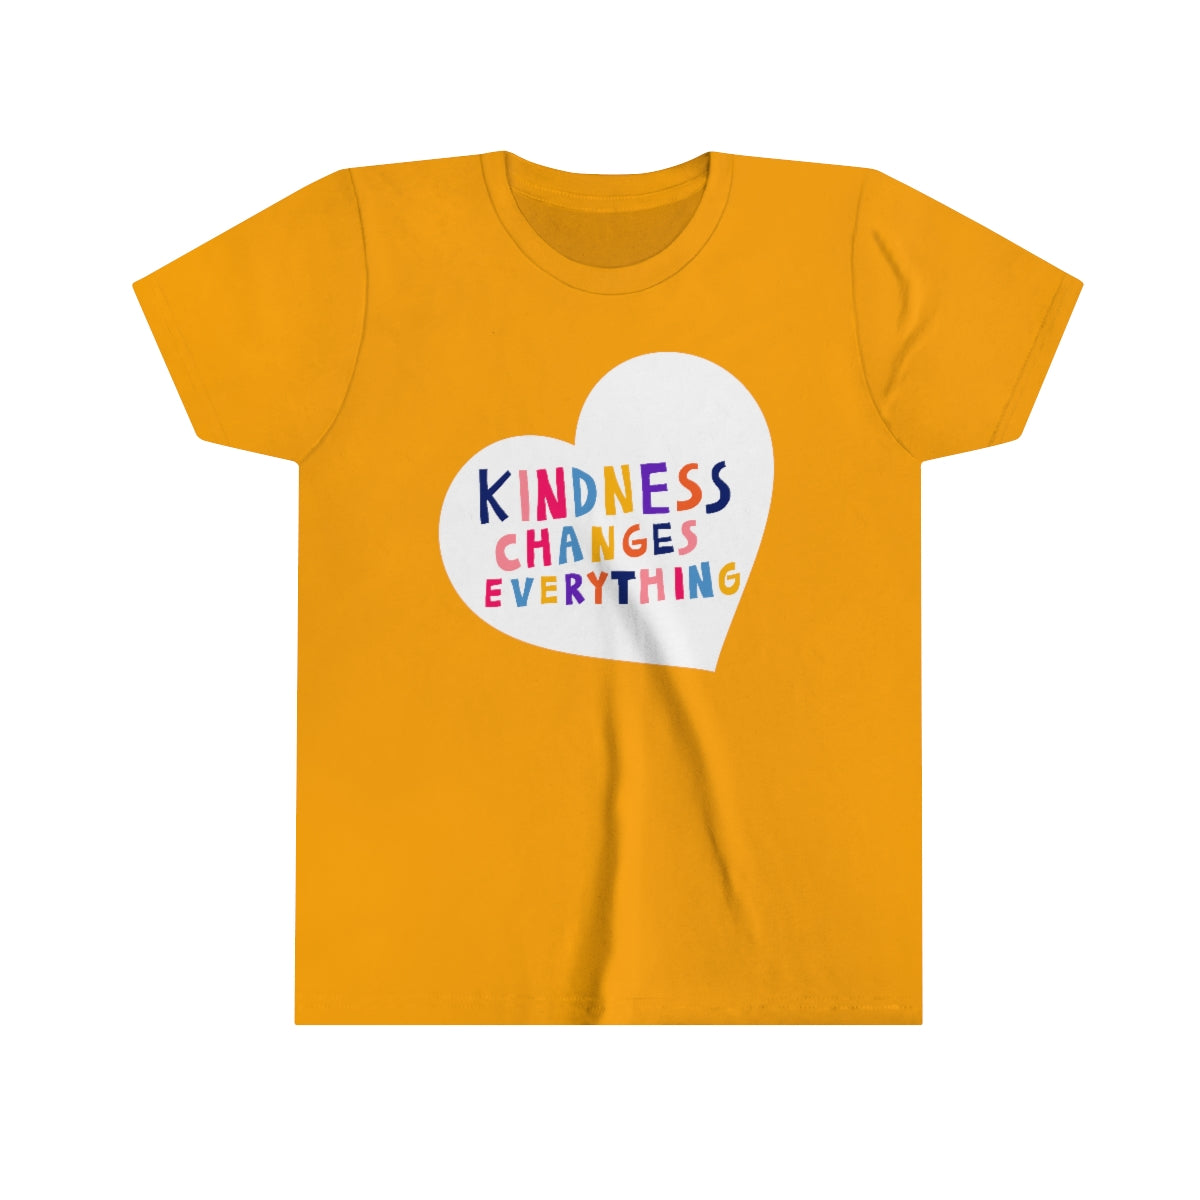 Youth Short Sleeve Tee "Pink shirt DAY Kindness changes everything"